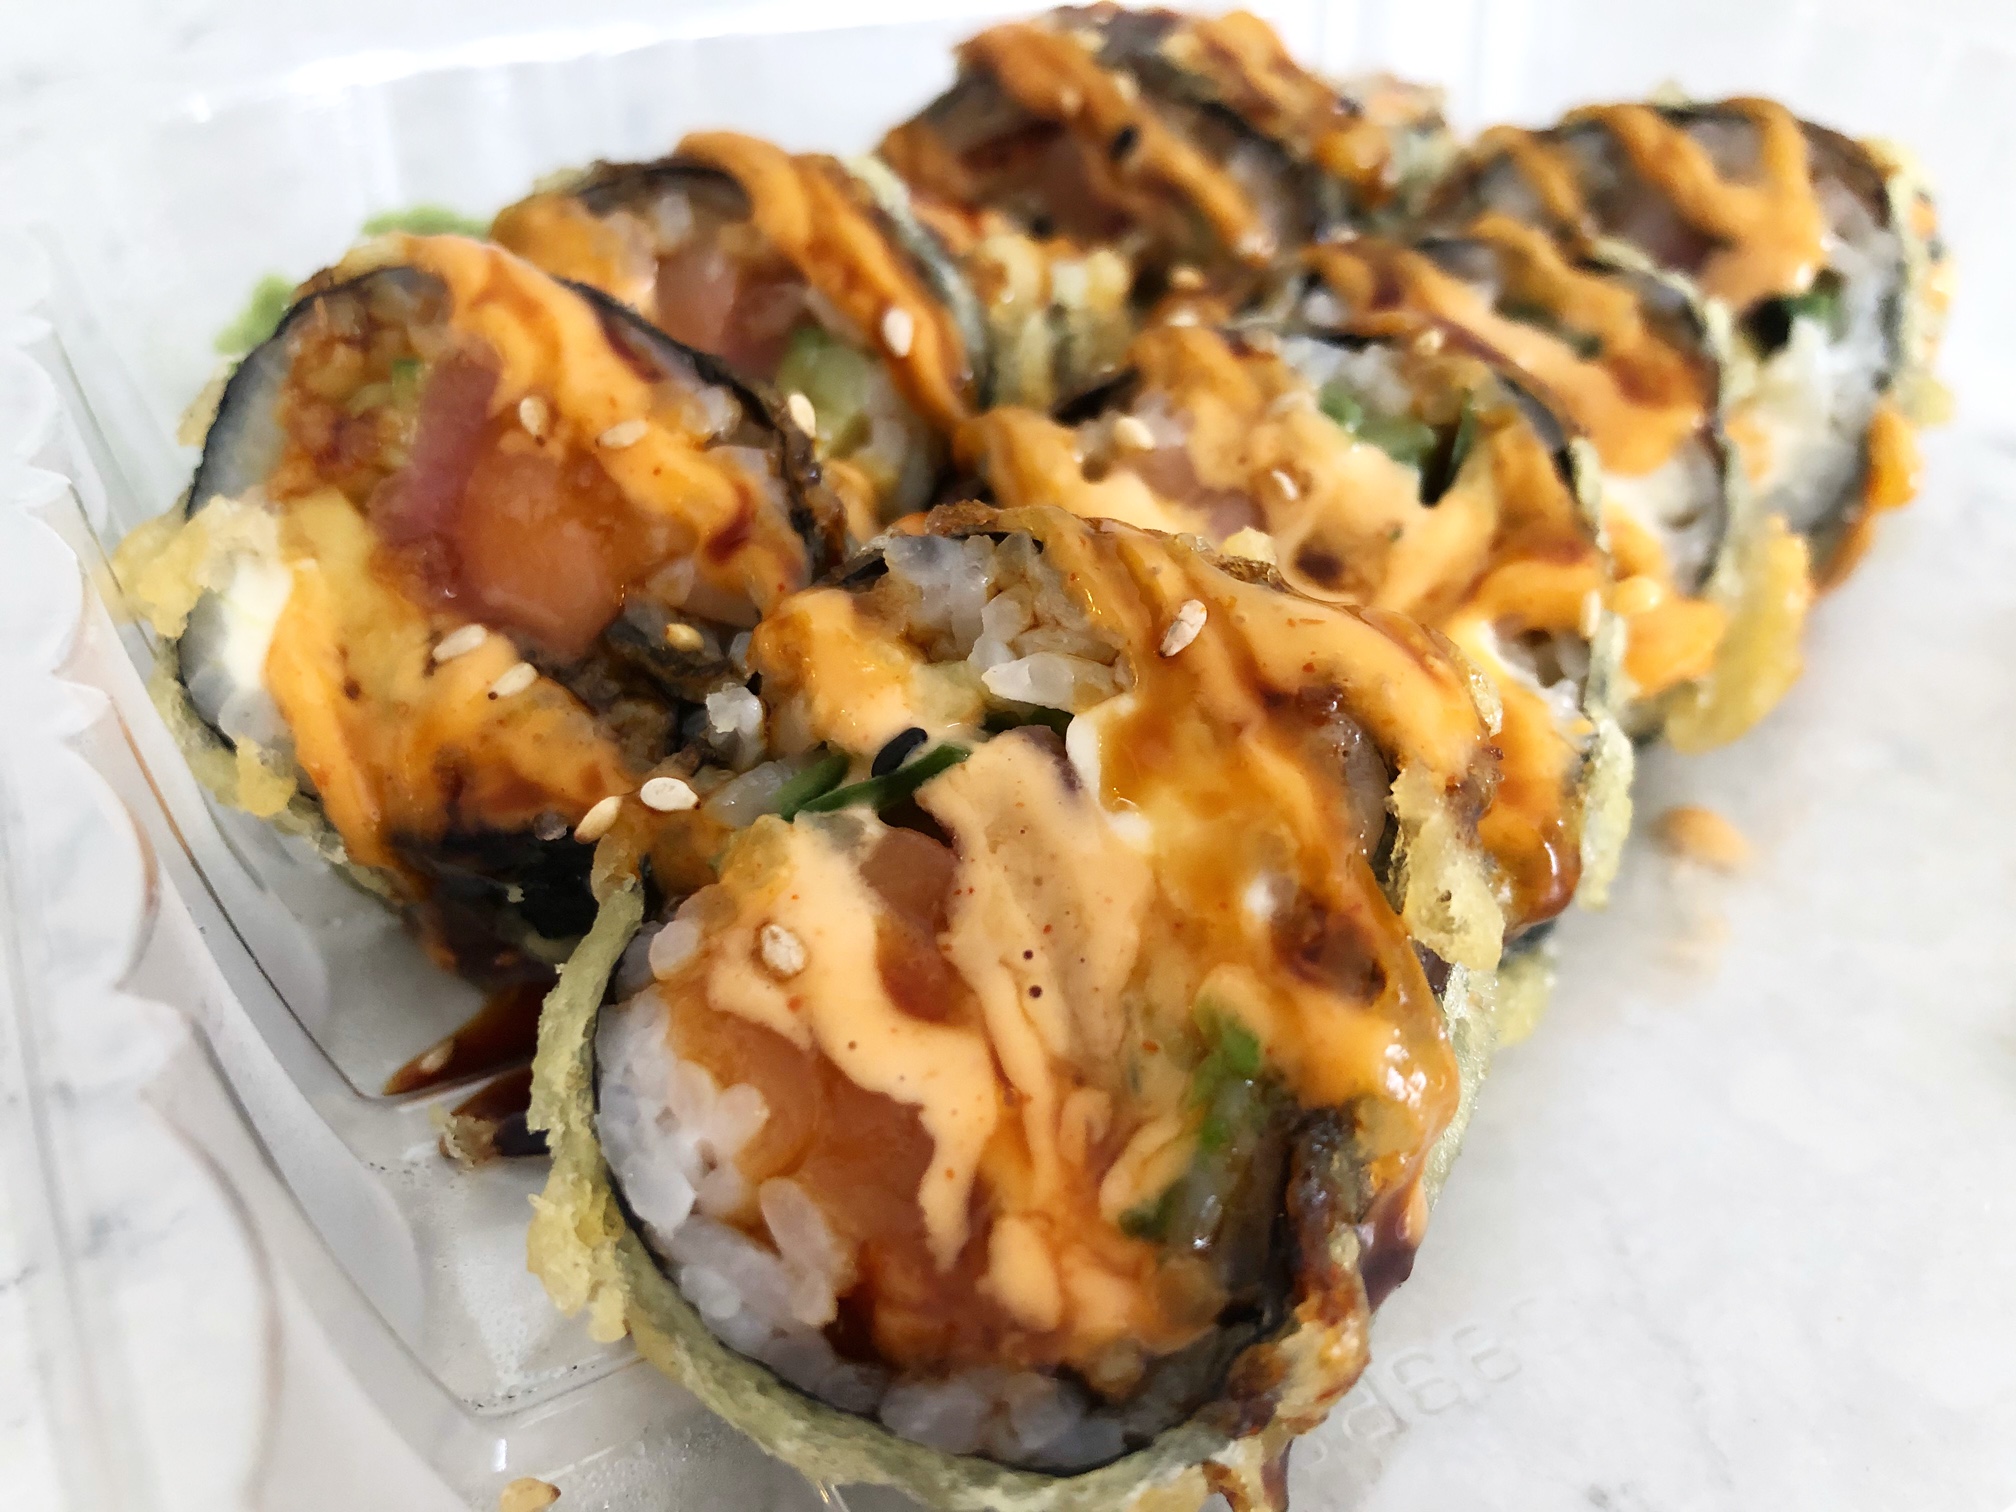 A large sushi roll cut into ten pieces has been deep fried with a light brown tempura batter with two sauces drizzled on top: orange spicy mayo and a dark brown eel sauce. Photo by Alyssa Buckley.